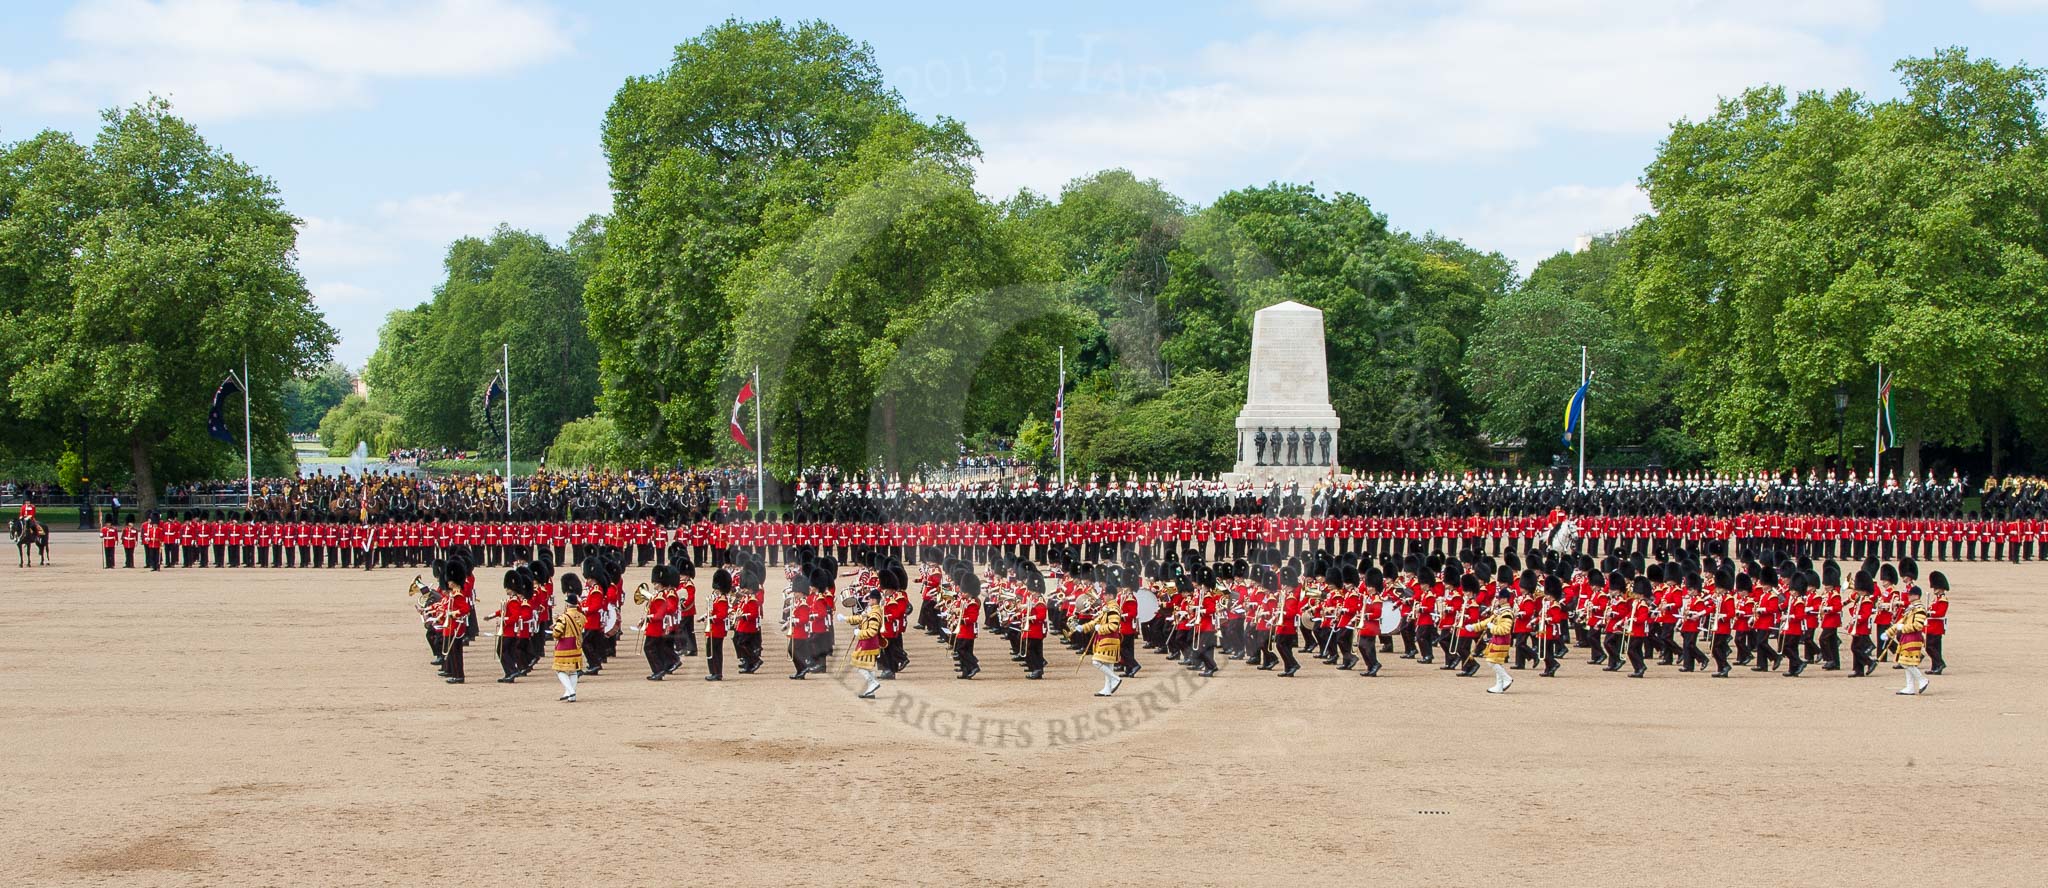 The Colonel's Review 2013: The Massed Band march away to leave room for  the Mounted Bands..
Horse Guards Parade, Westminster,
London SW1,

United Kingdom,
on 08 June 2013 at 11:49, image #714